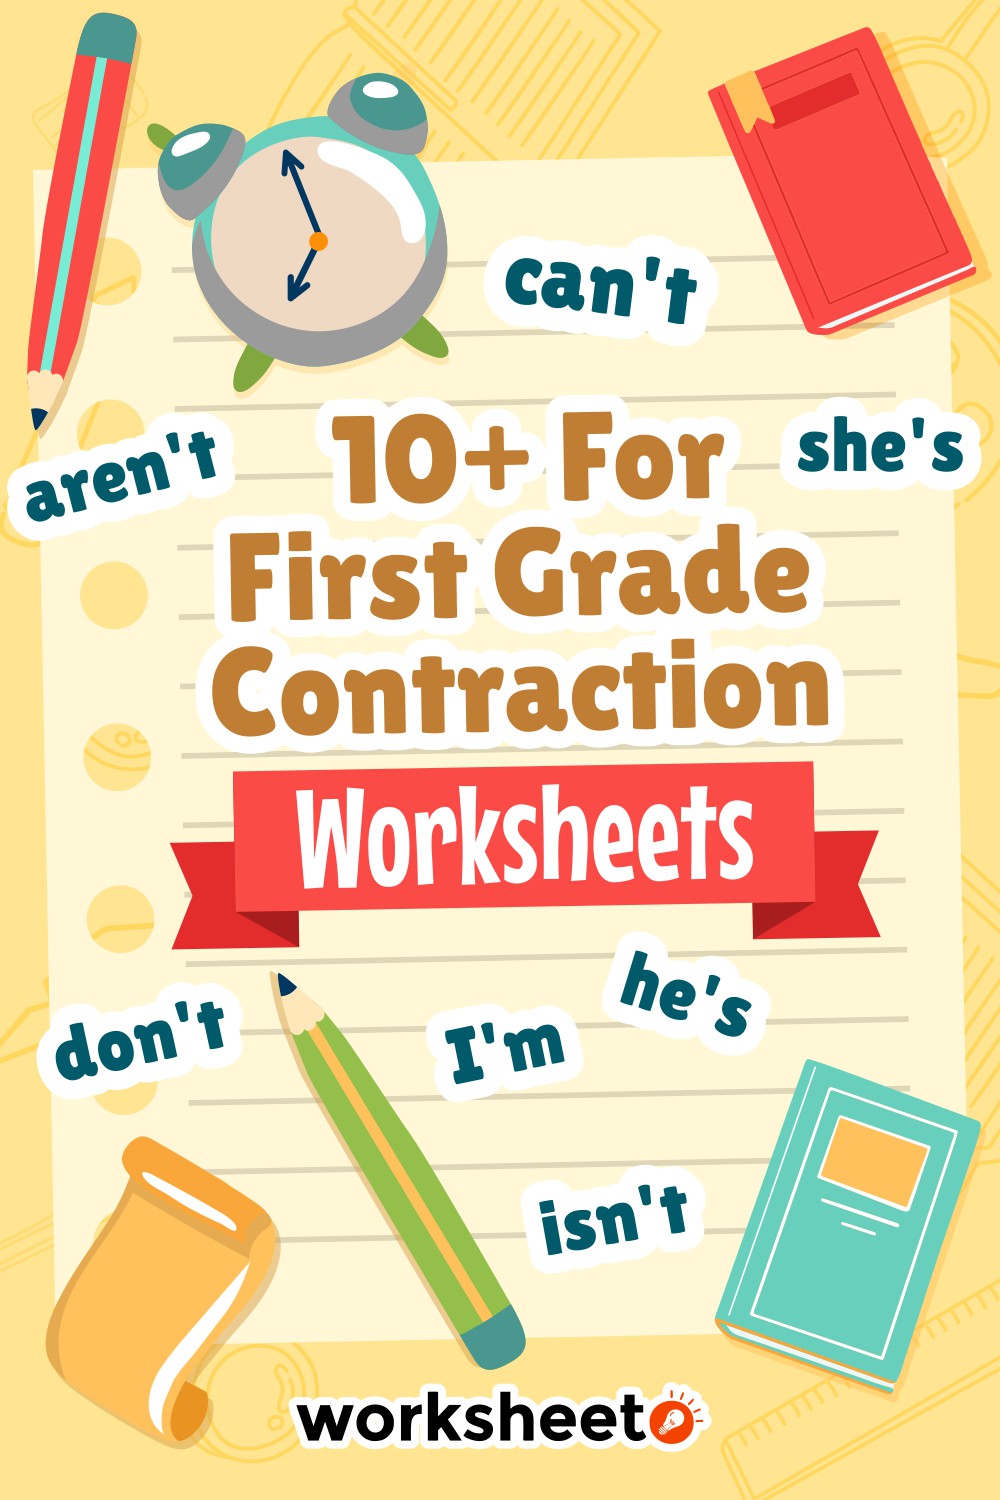 For First Grade Contraction Worksheets